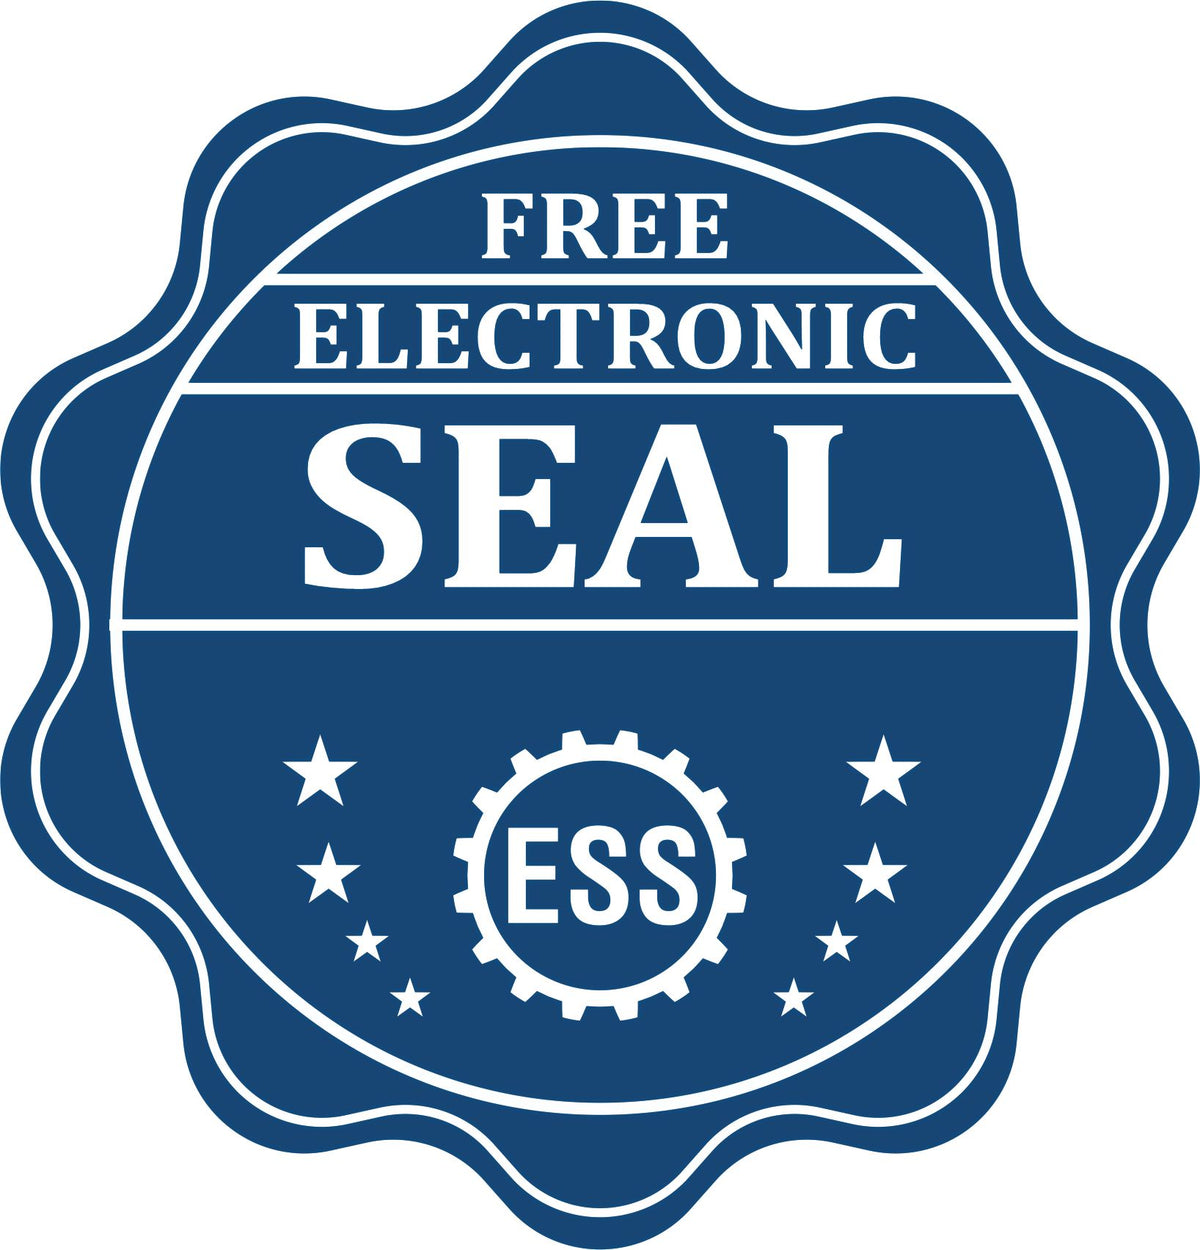 A badge showing a free electronic seal for the State of Arkansas Soft Land Surveyor Embossing Seal with stars and the ESS gear on the emblem.